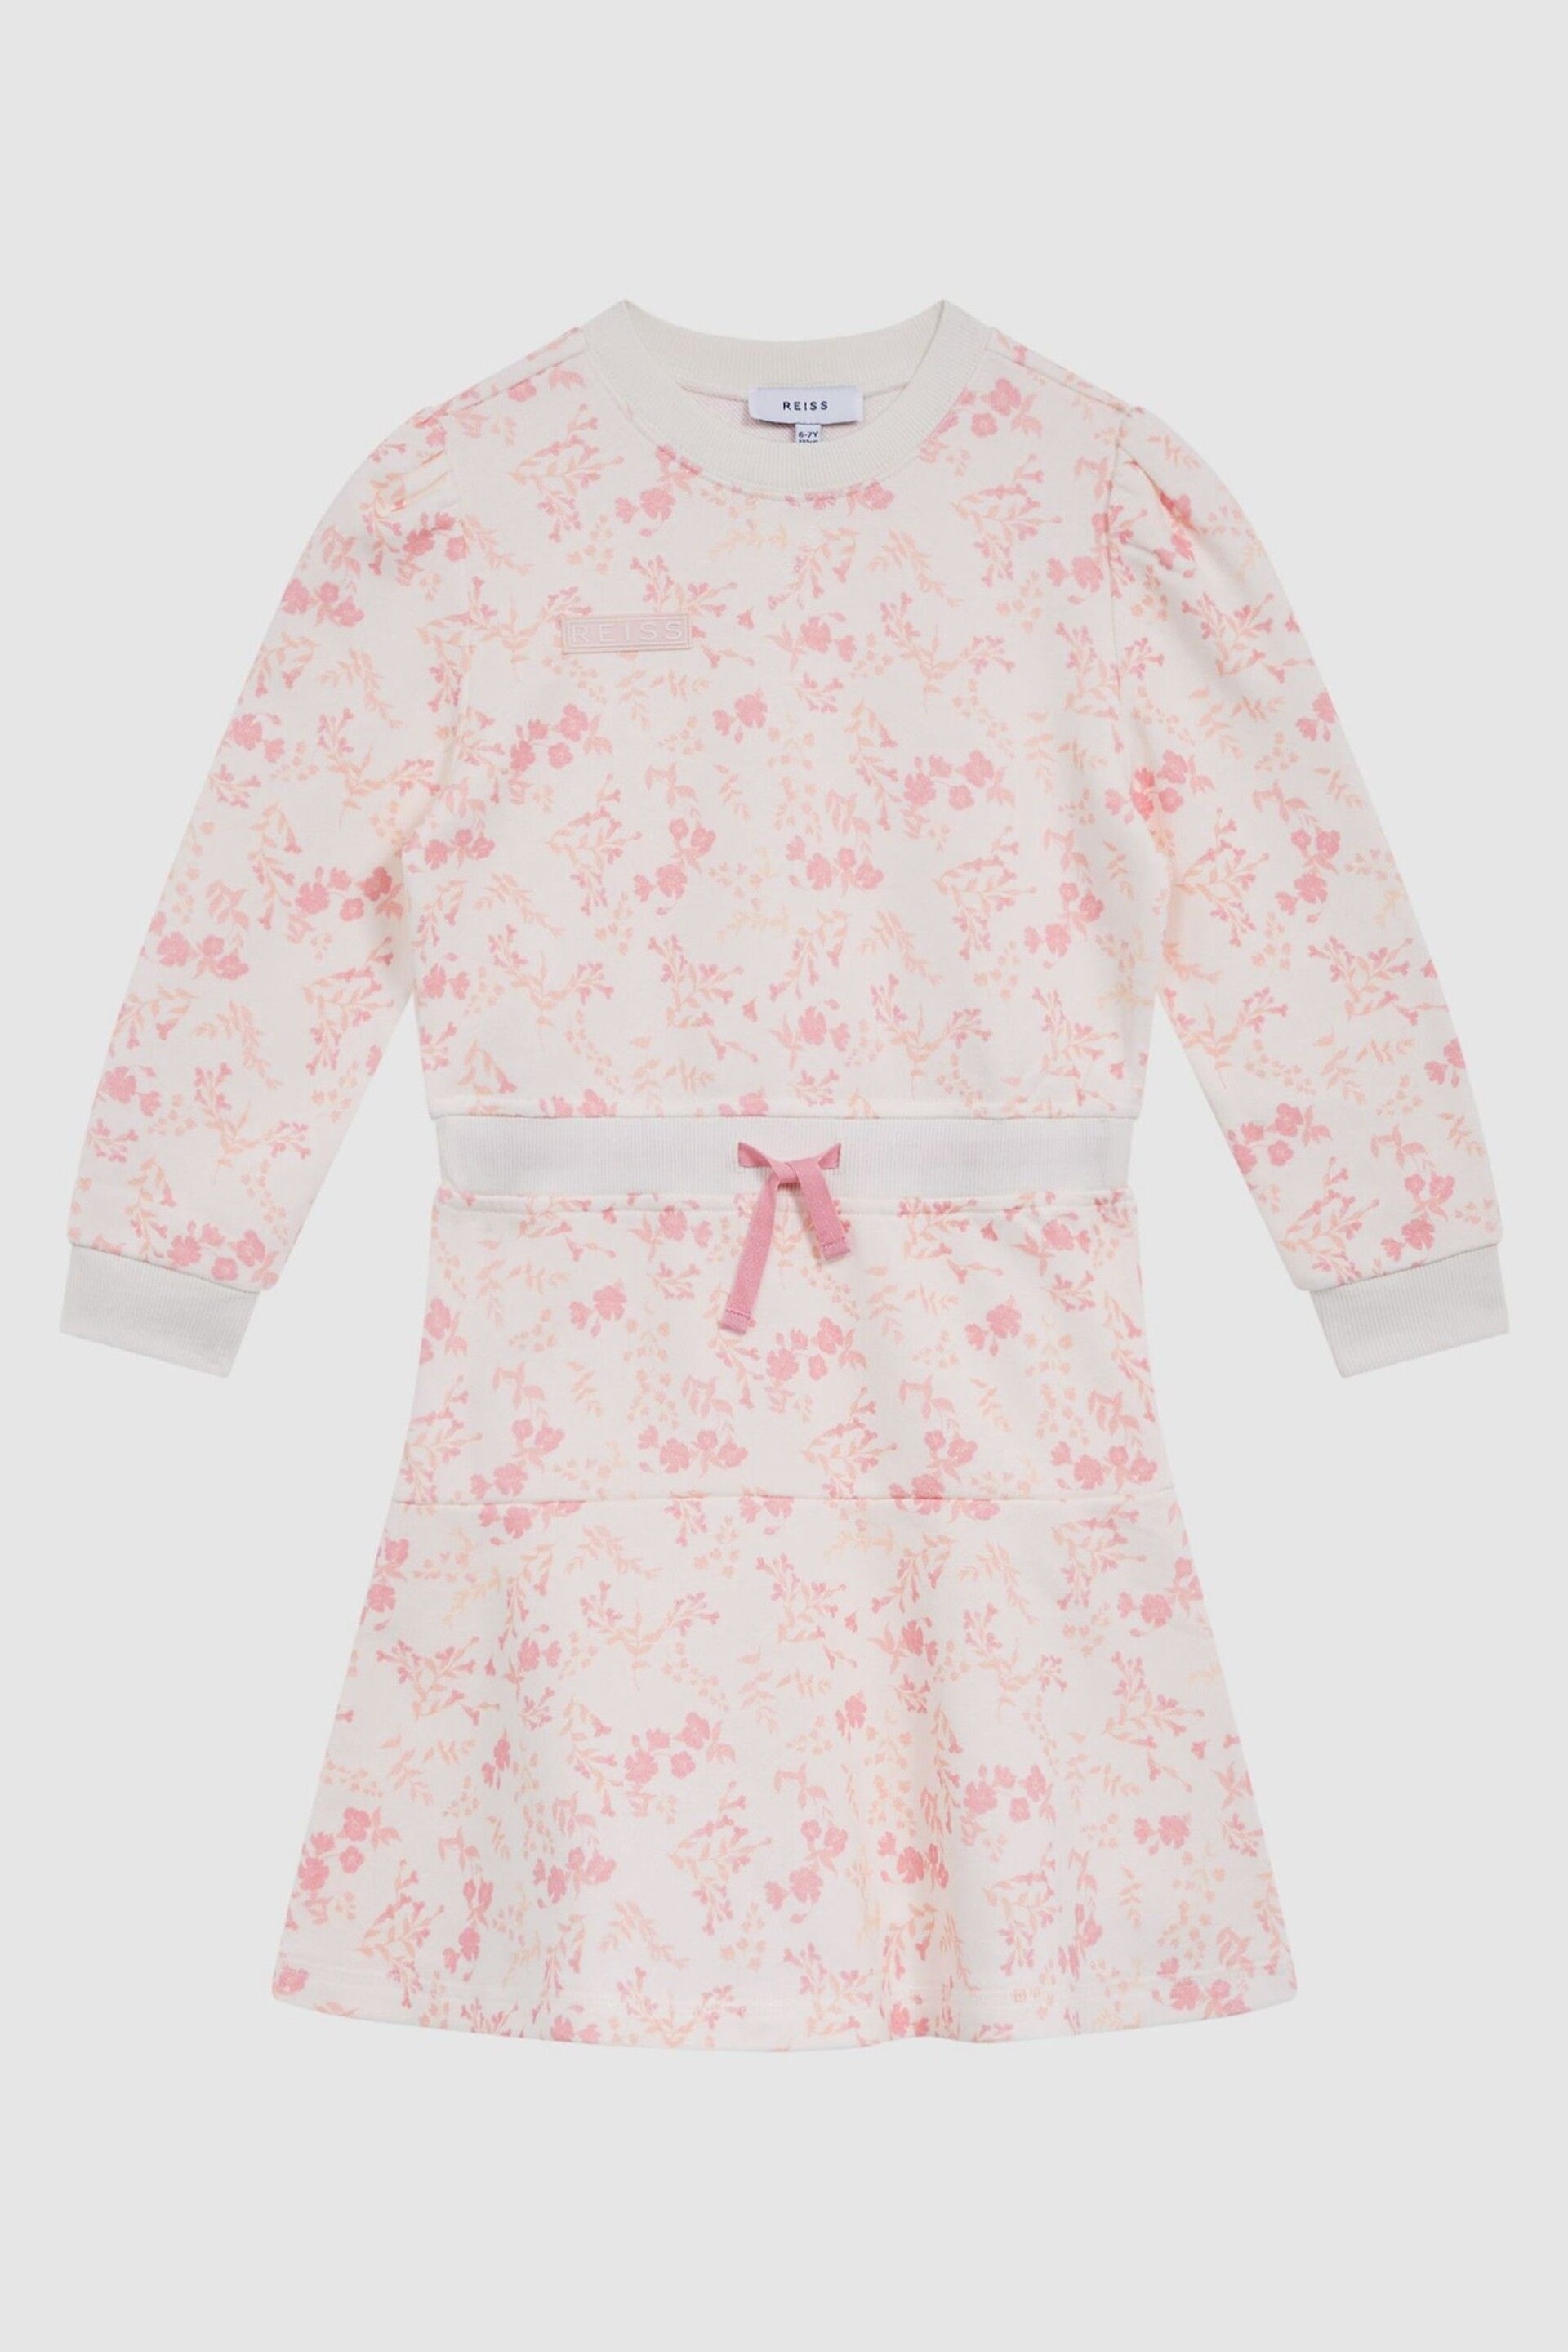 Reiss Pink Print Maeve Junior Relaxed Jersey Dress - Image 2 of 7